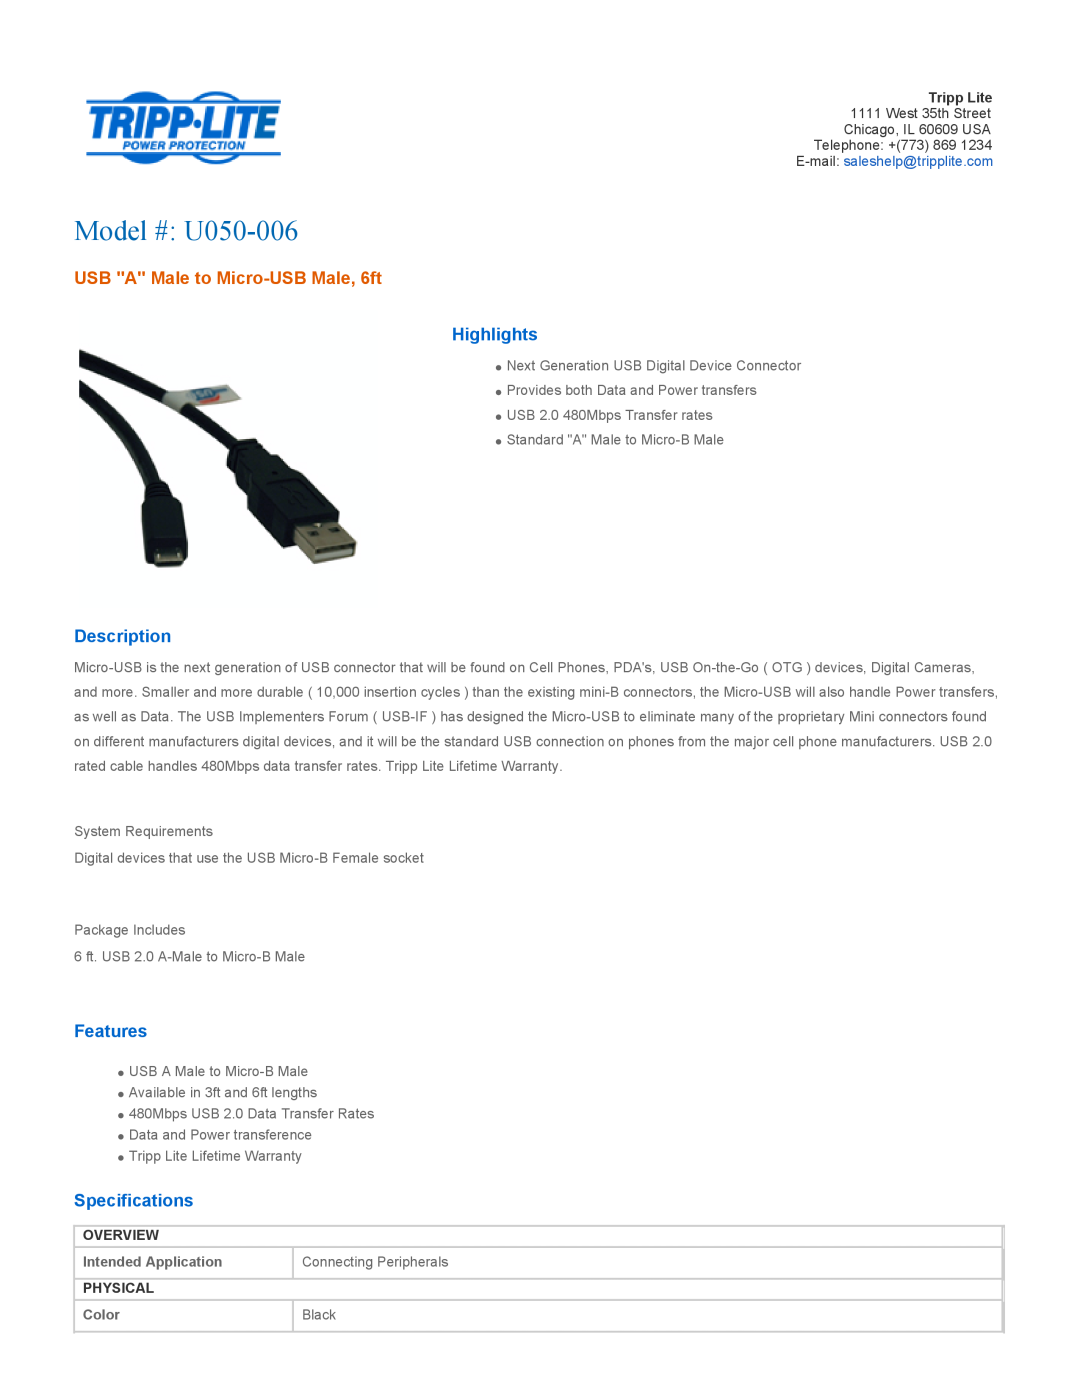 Tripp Lite U050-006 specifications Overview, Intended Application, Connecting Peripherals, Physical, Color, Black 